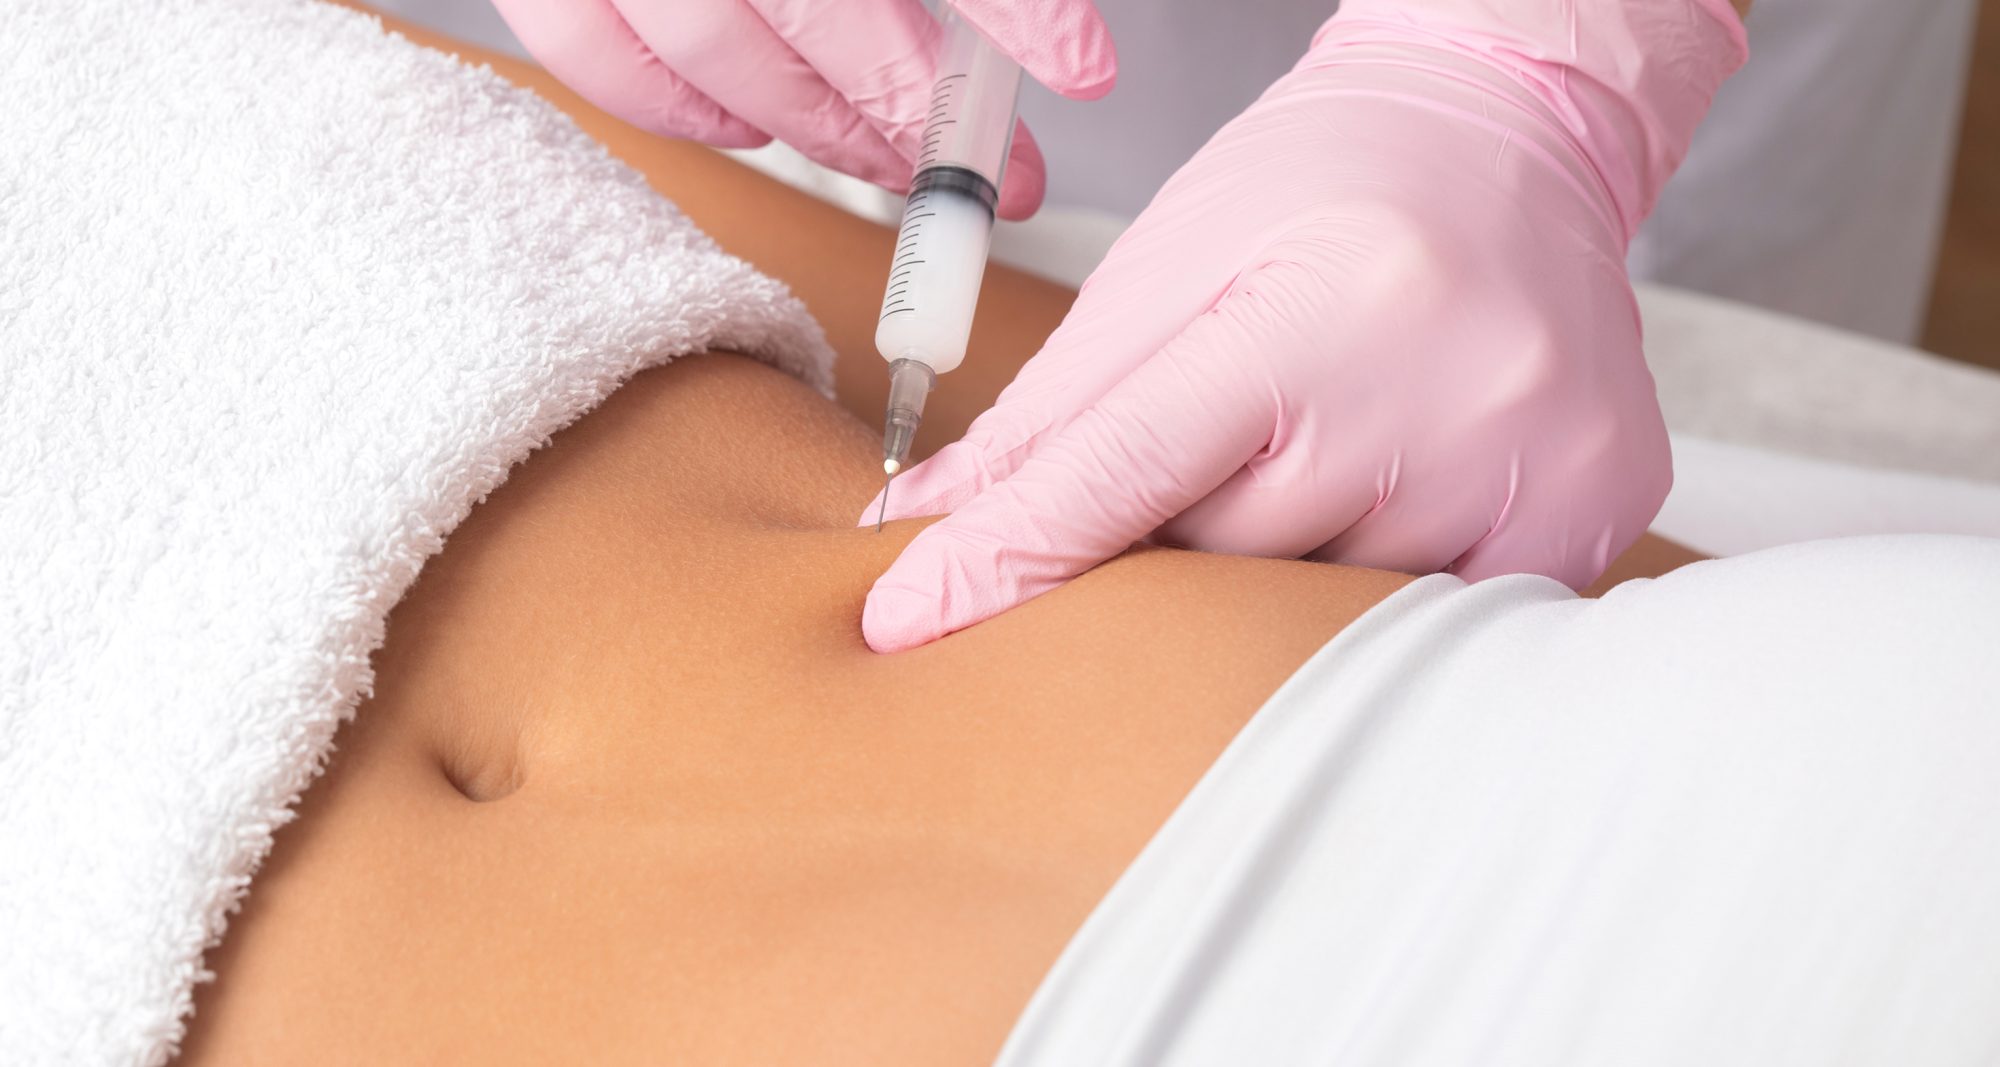 A doctor of aesthetic cosmetology makes lipolytic injections to burn body fat on a woman's stomach and body. Female aesthetic cosmetology in a beauty salon.